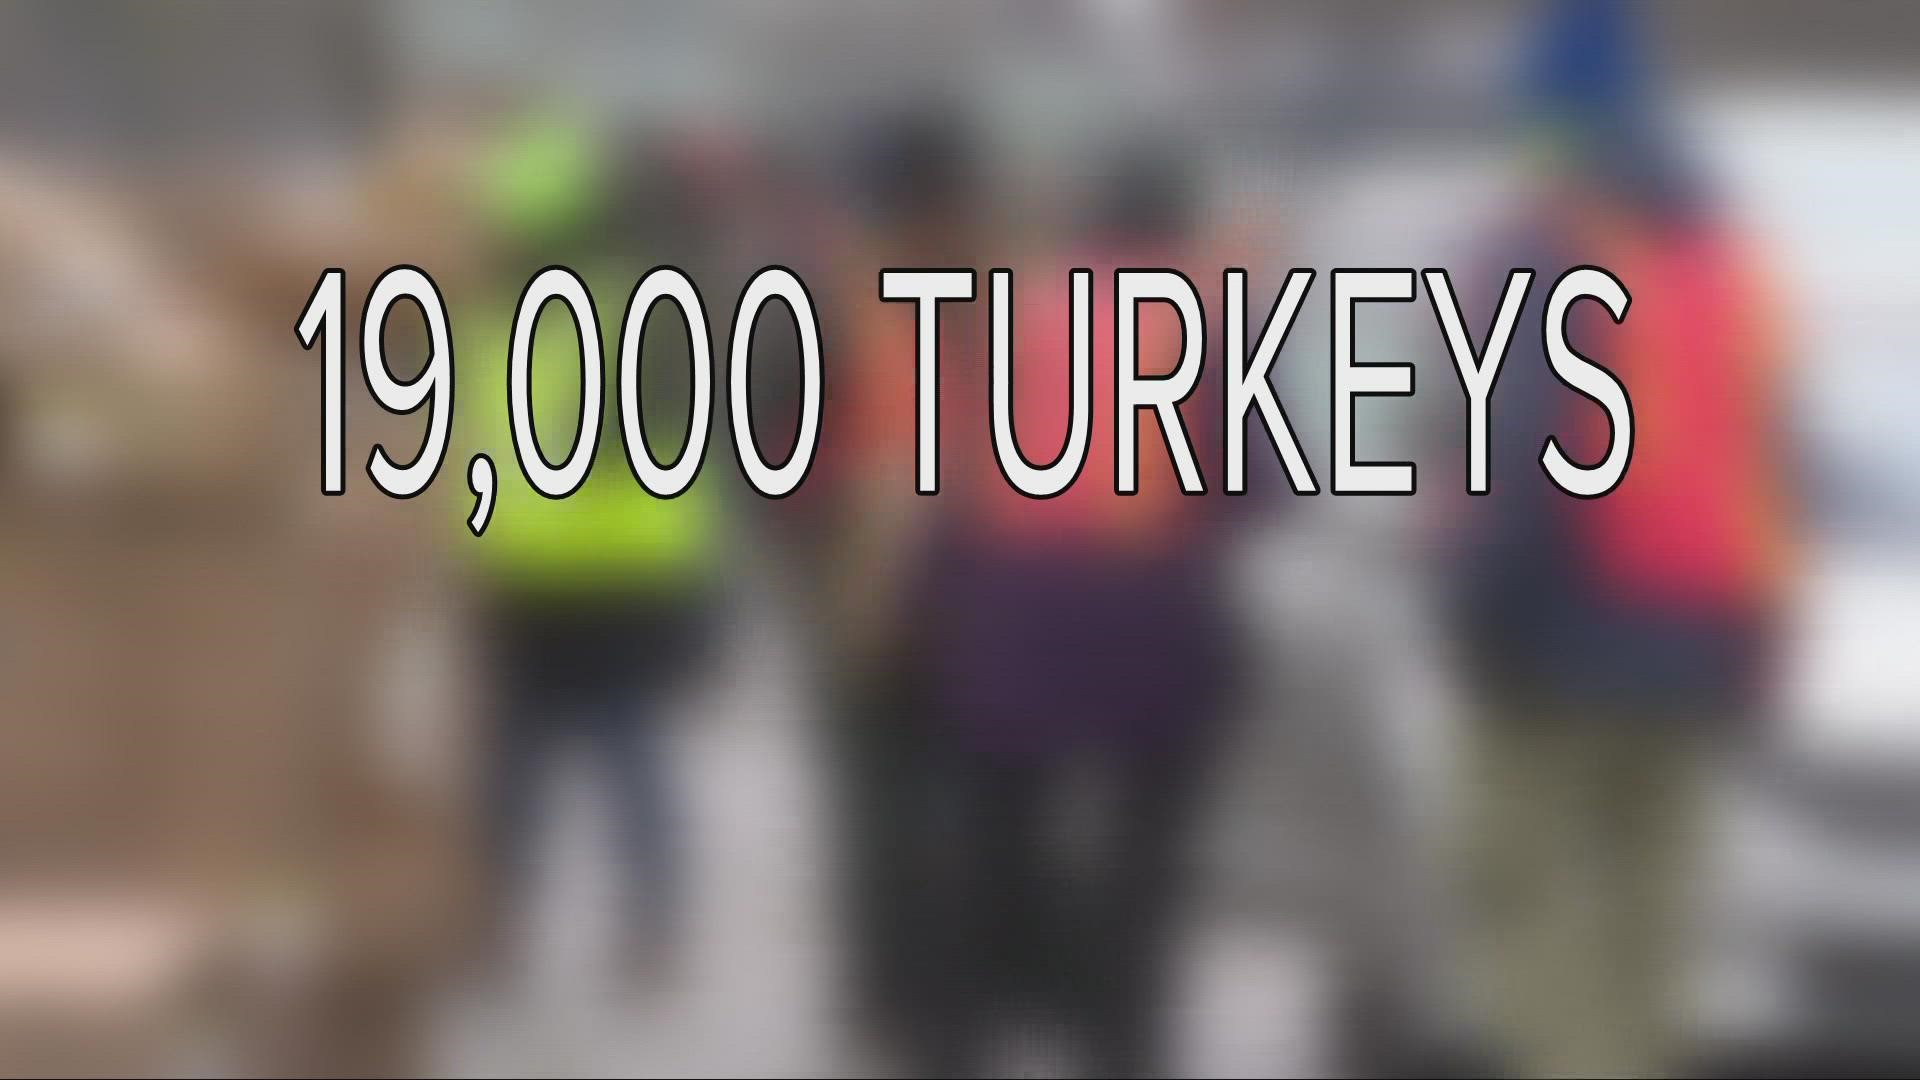 The Greater Cleveland Food Bank estimates they’ll provide 19,000 turkeys to families before Thanksgiving.